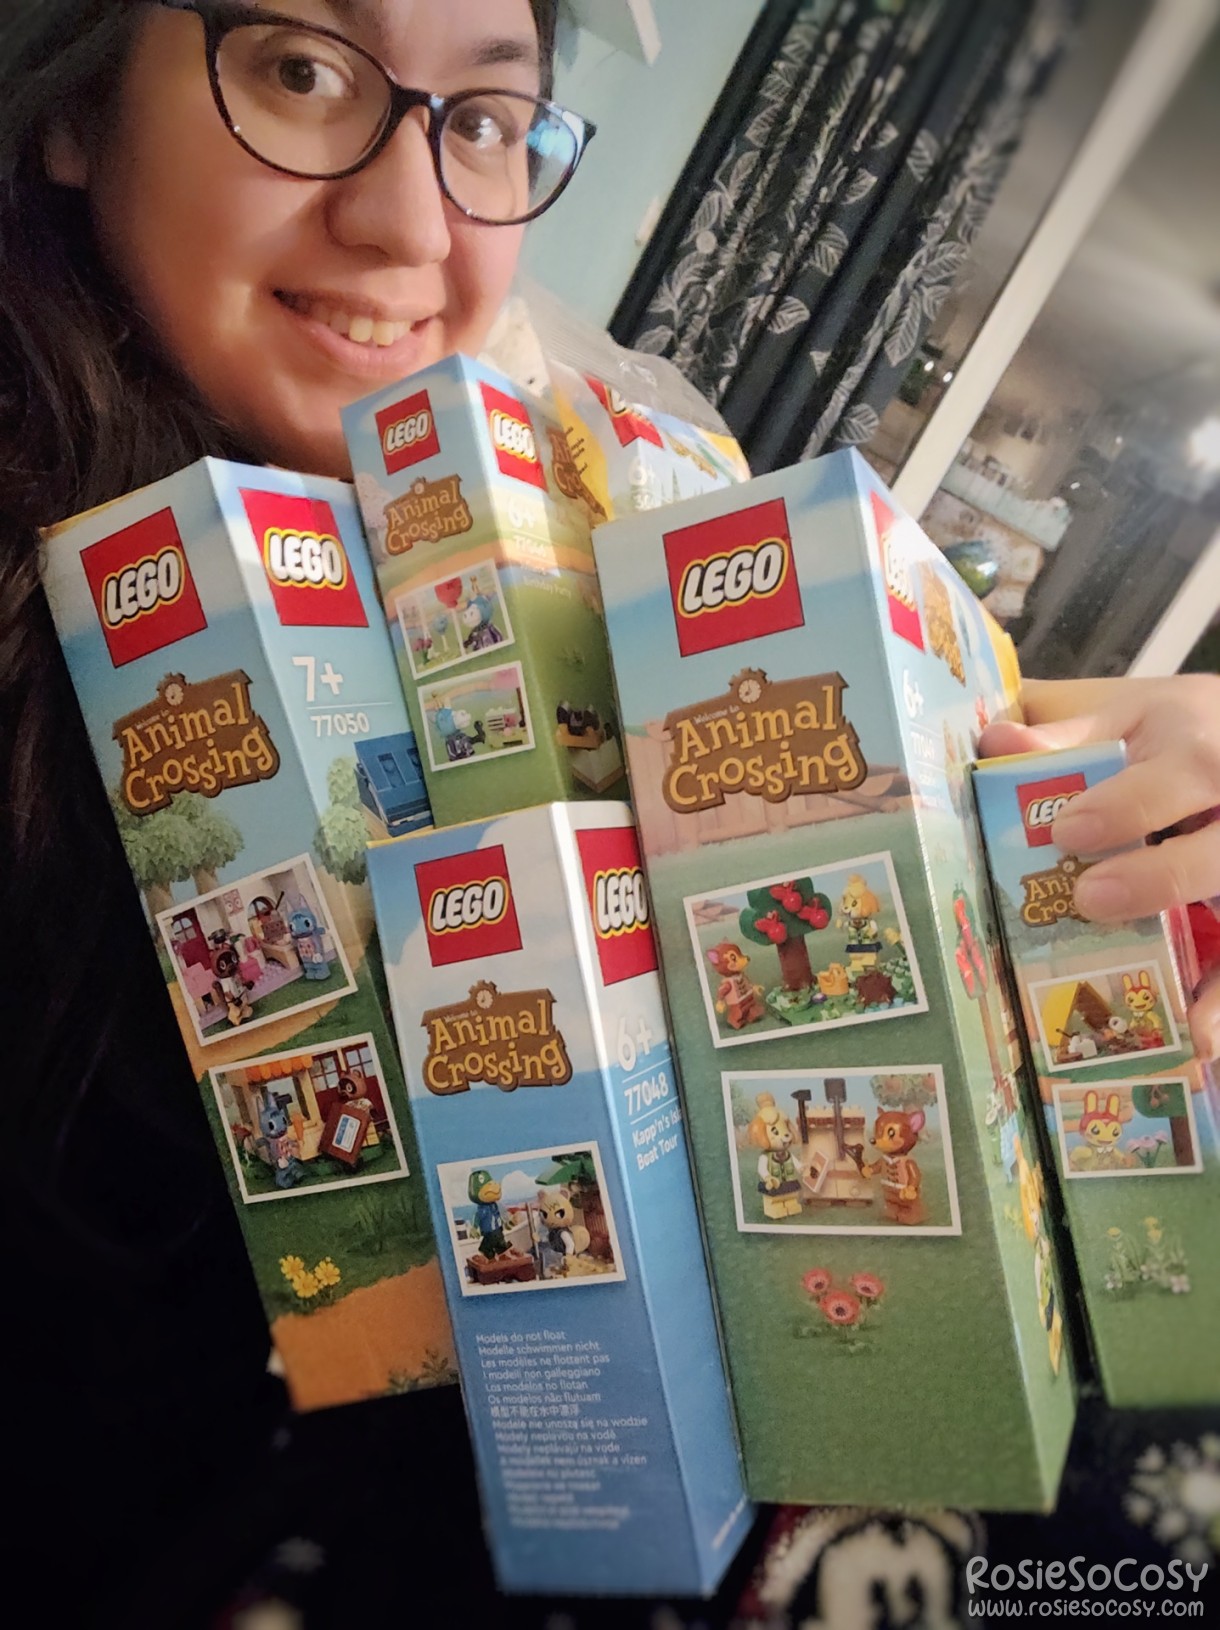 Rosie holding the Animal Crossing LEGO boxes